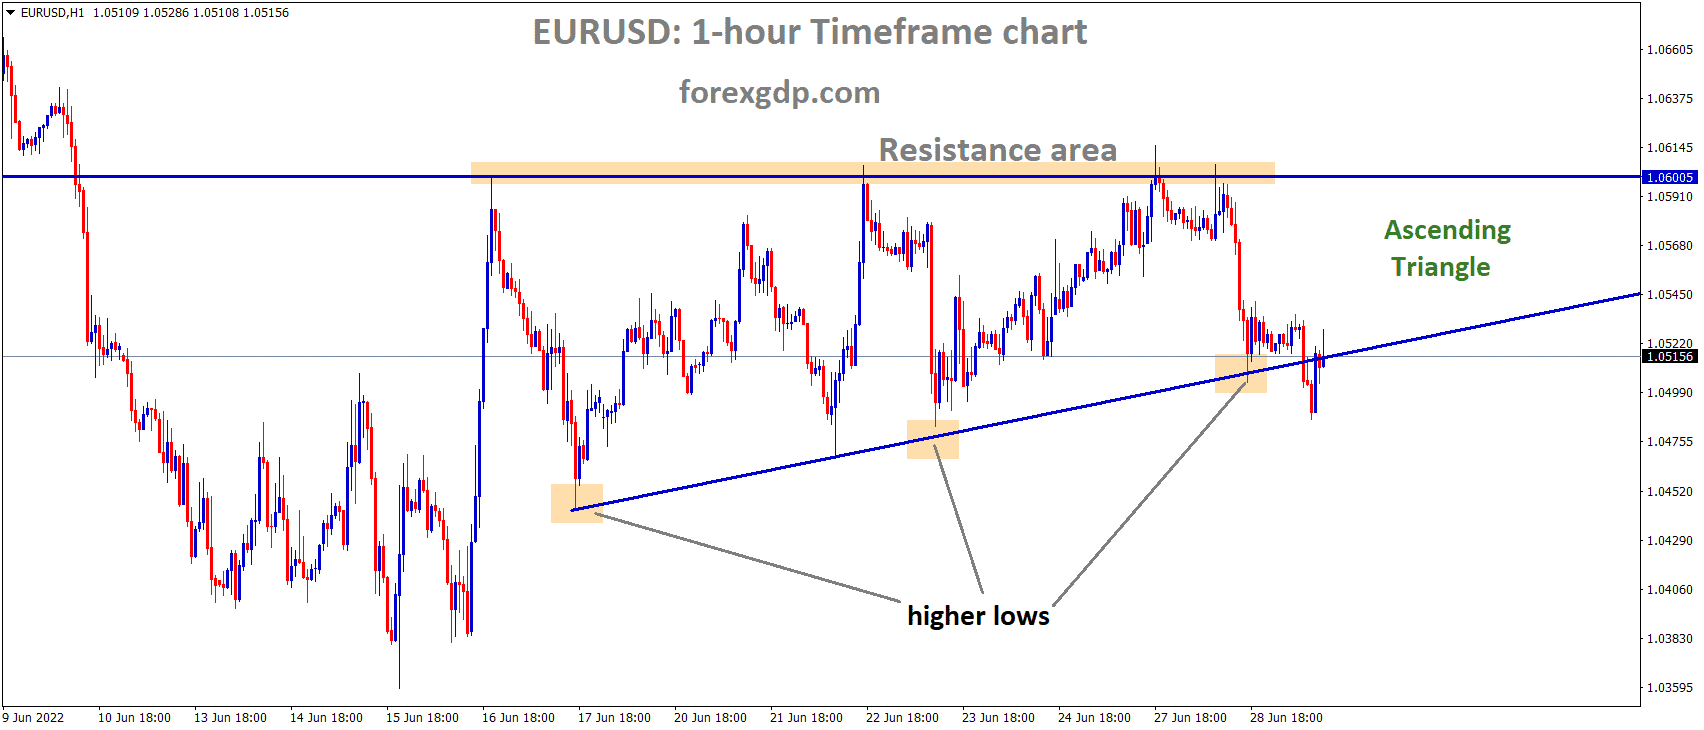 EURUSD is moving in an Ascending triangle pattern and the Market has rebounded from the higher low area of the pattern